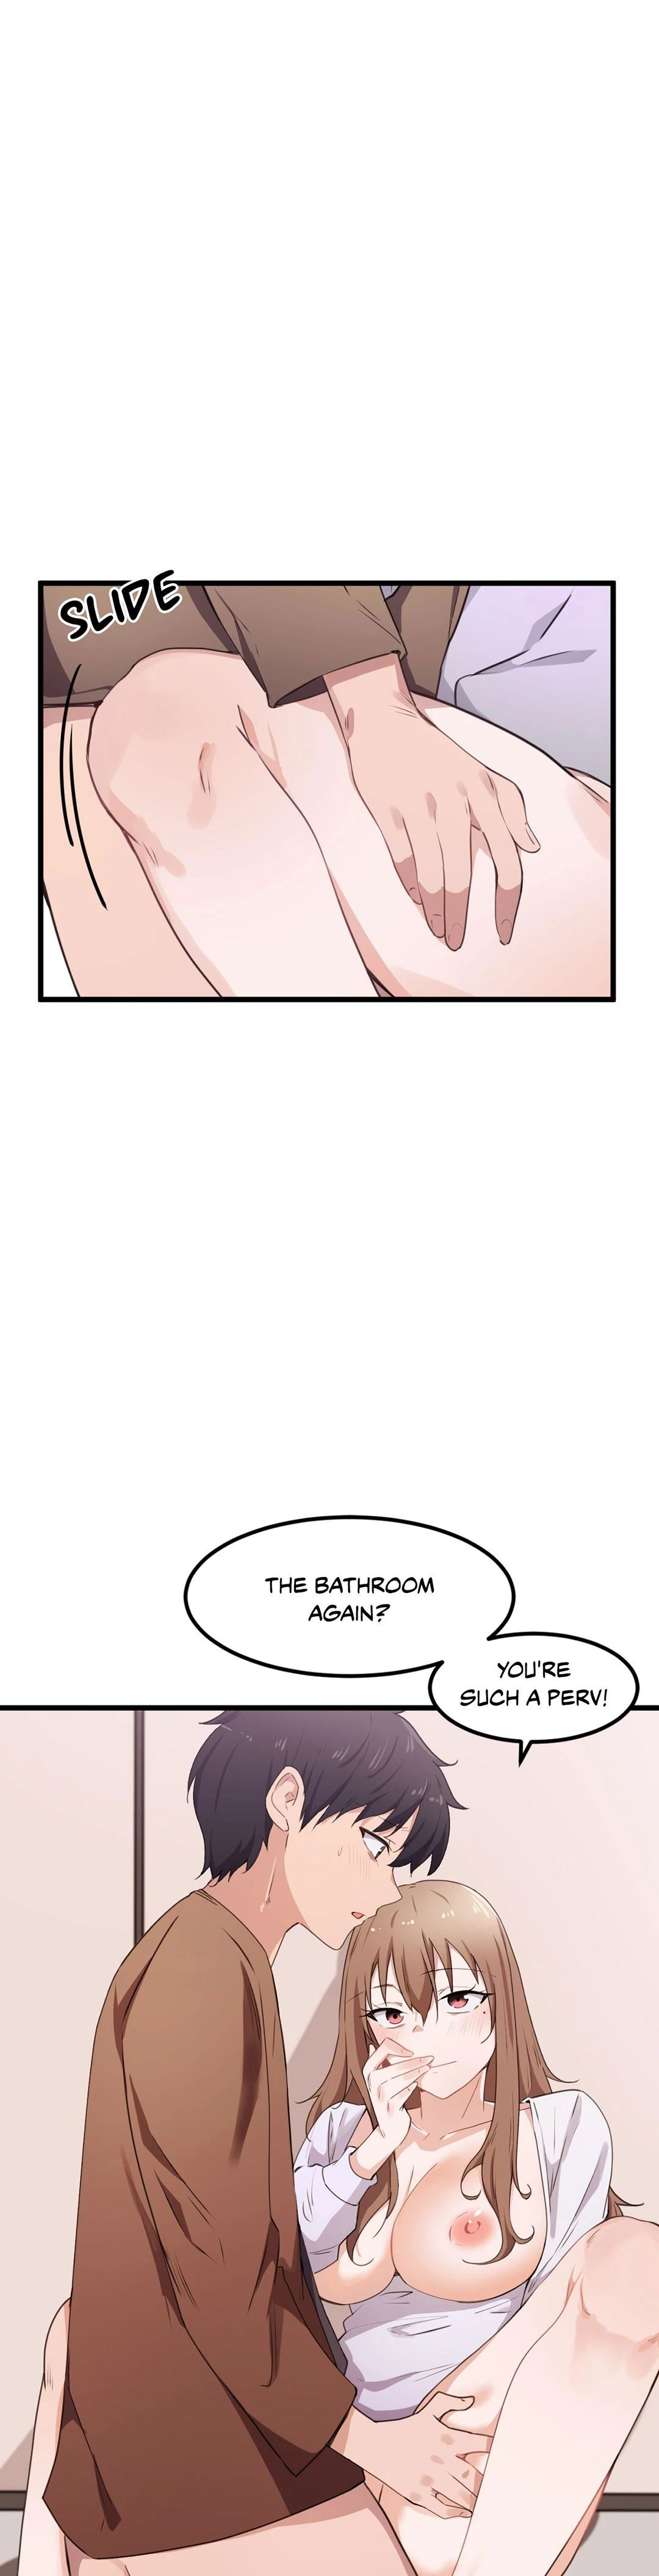 i-wanna-be-a-daughter-thief-chap-30-15